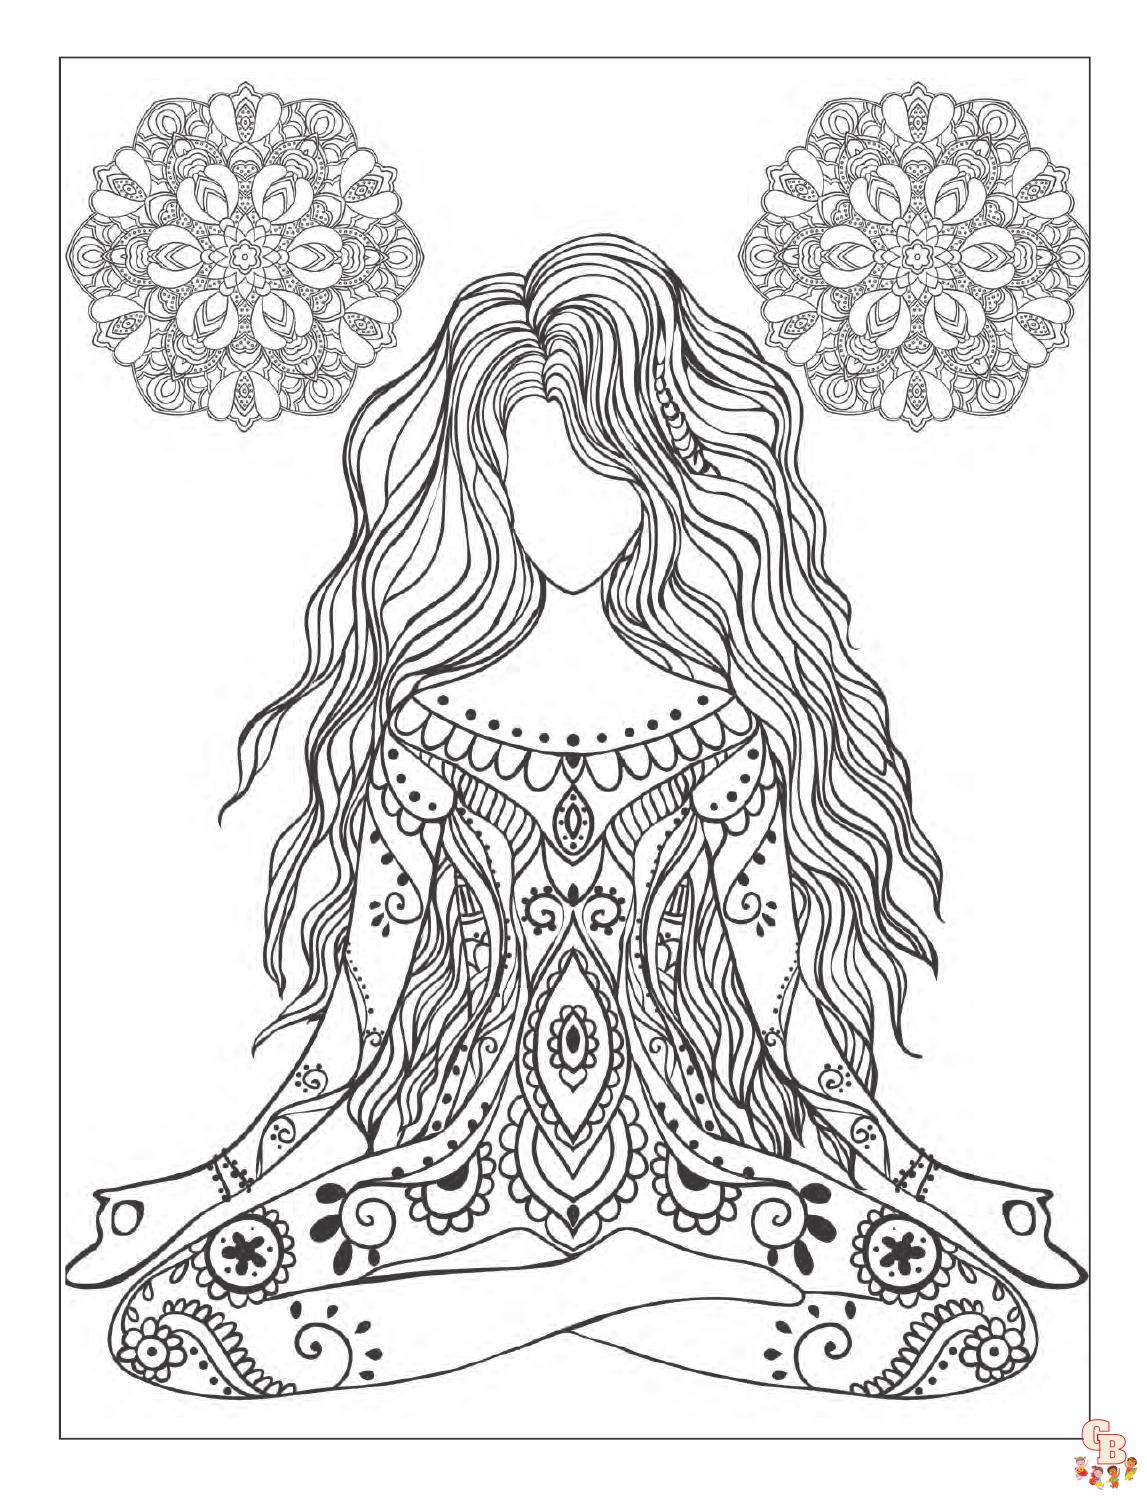 Mindfulness Coloring Pages 7